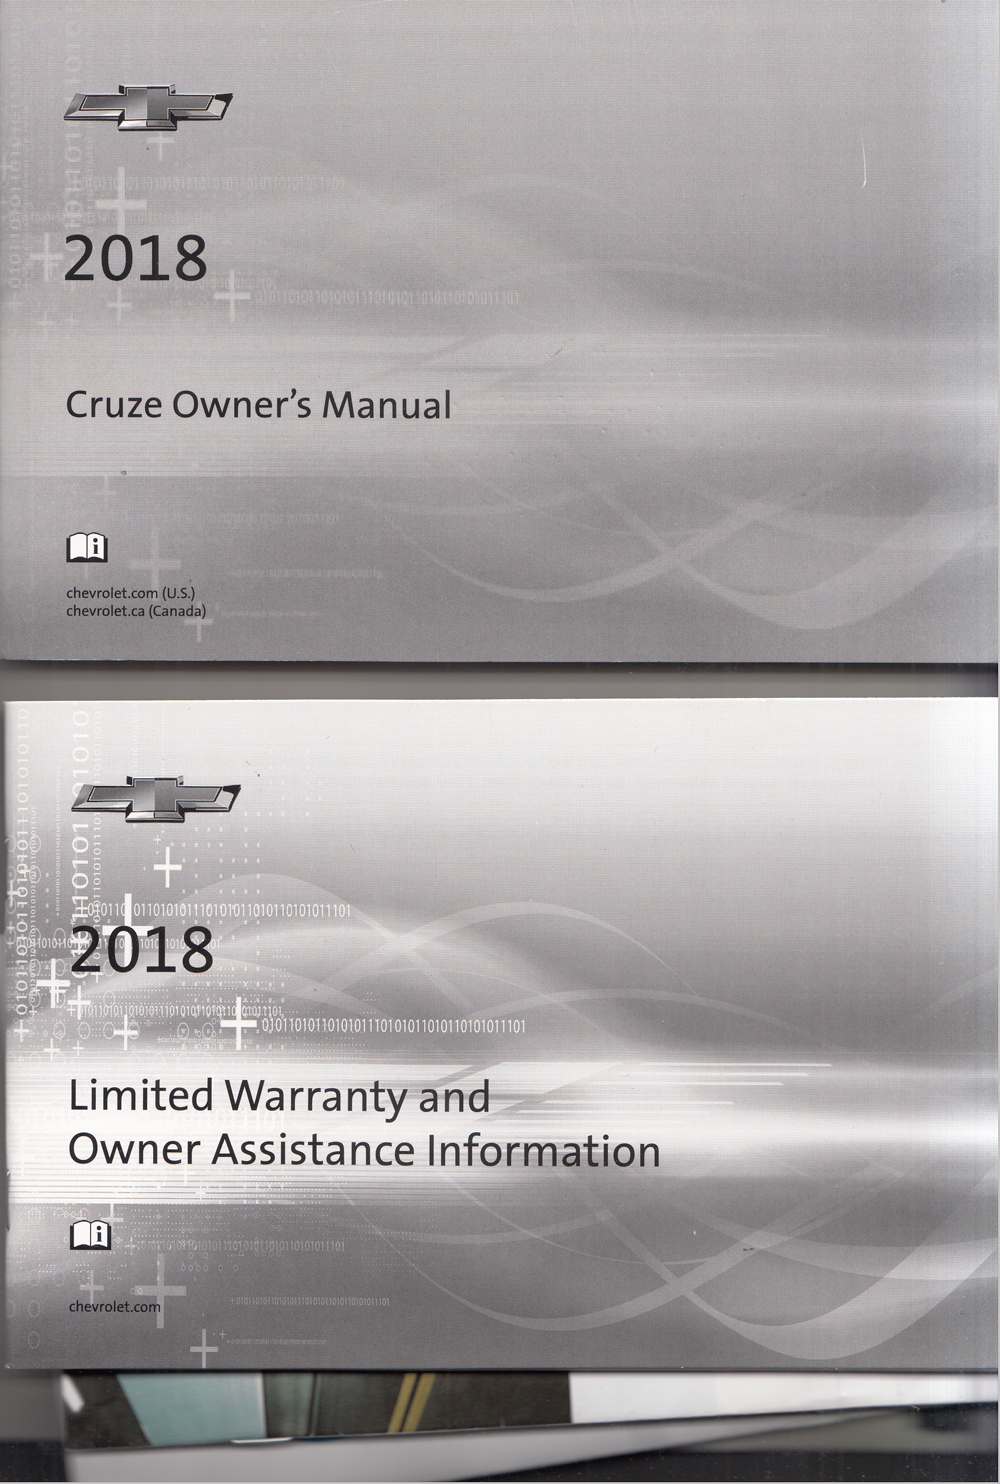 2018 Chevrolet Cruze Owners Manual with Pamphlets Original